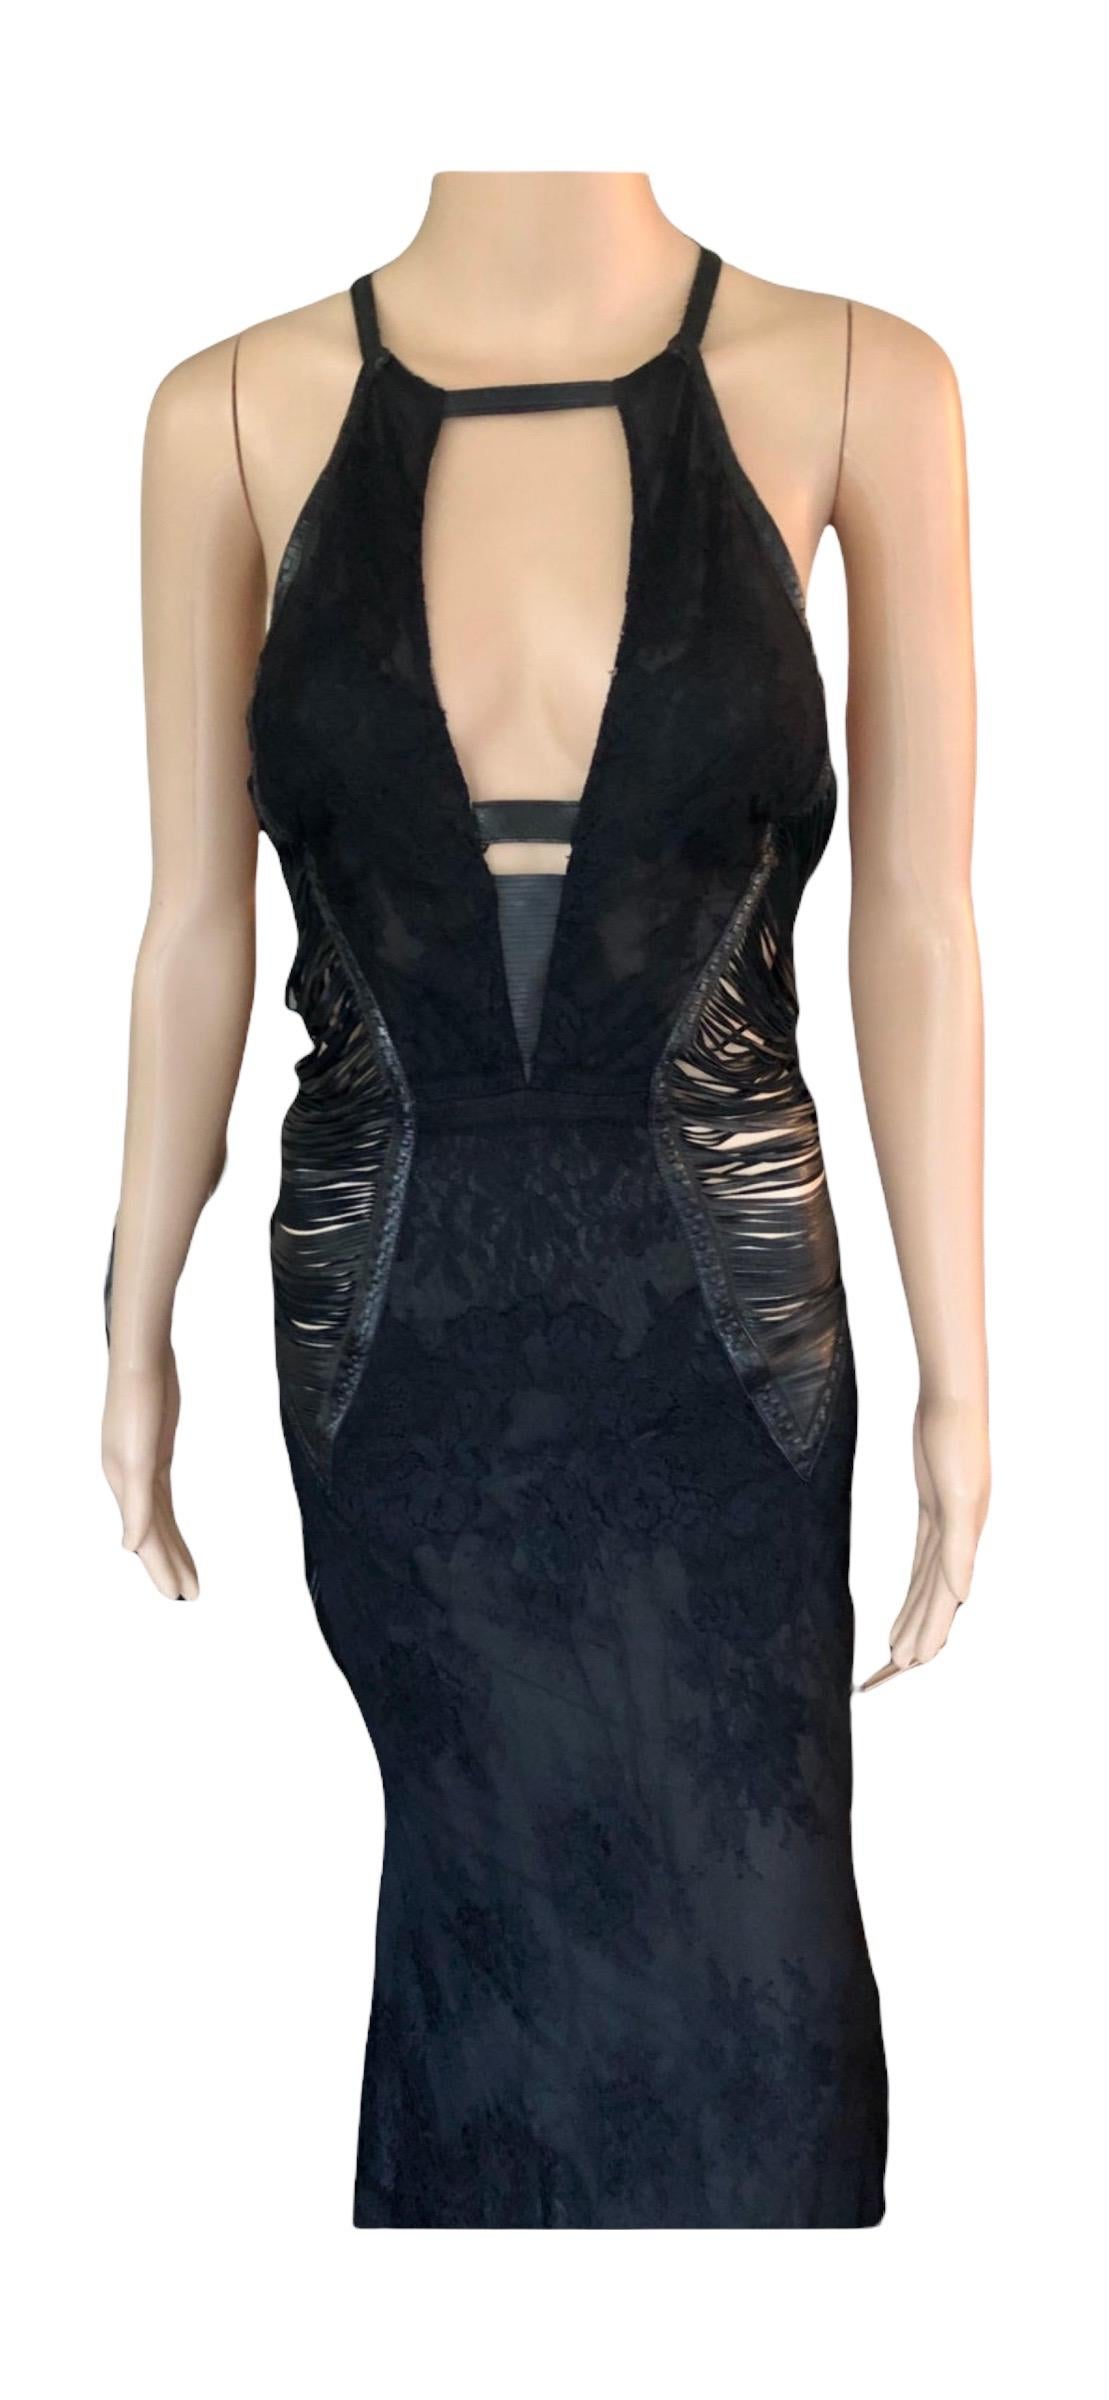 Roberto Cavalli S/S 2013 Leather Cutout Open Back Black Evening Dress Gown For Sale 9